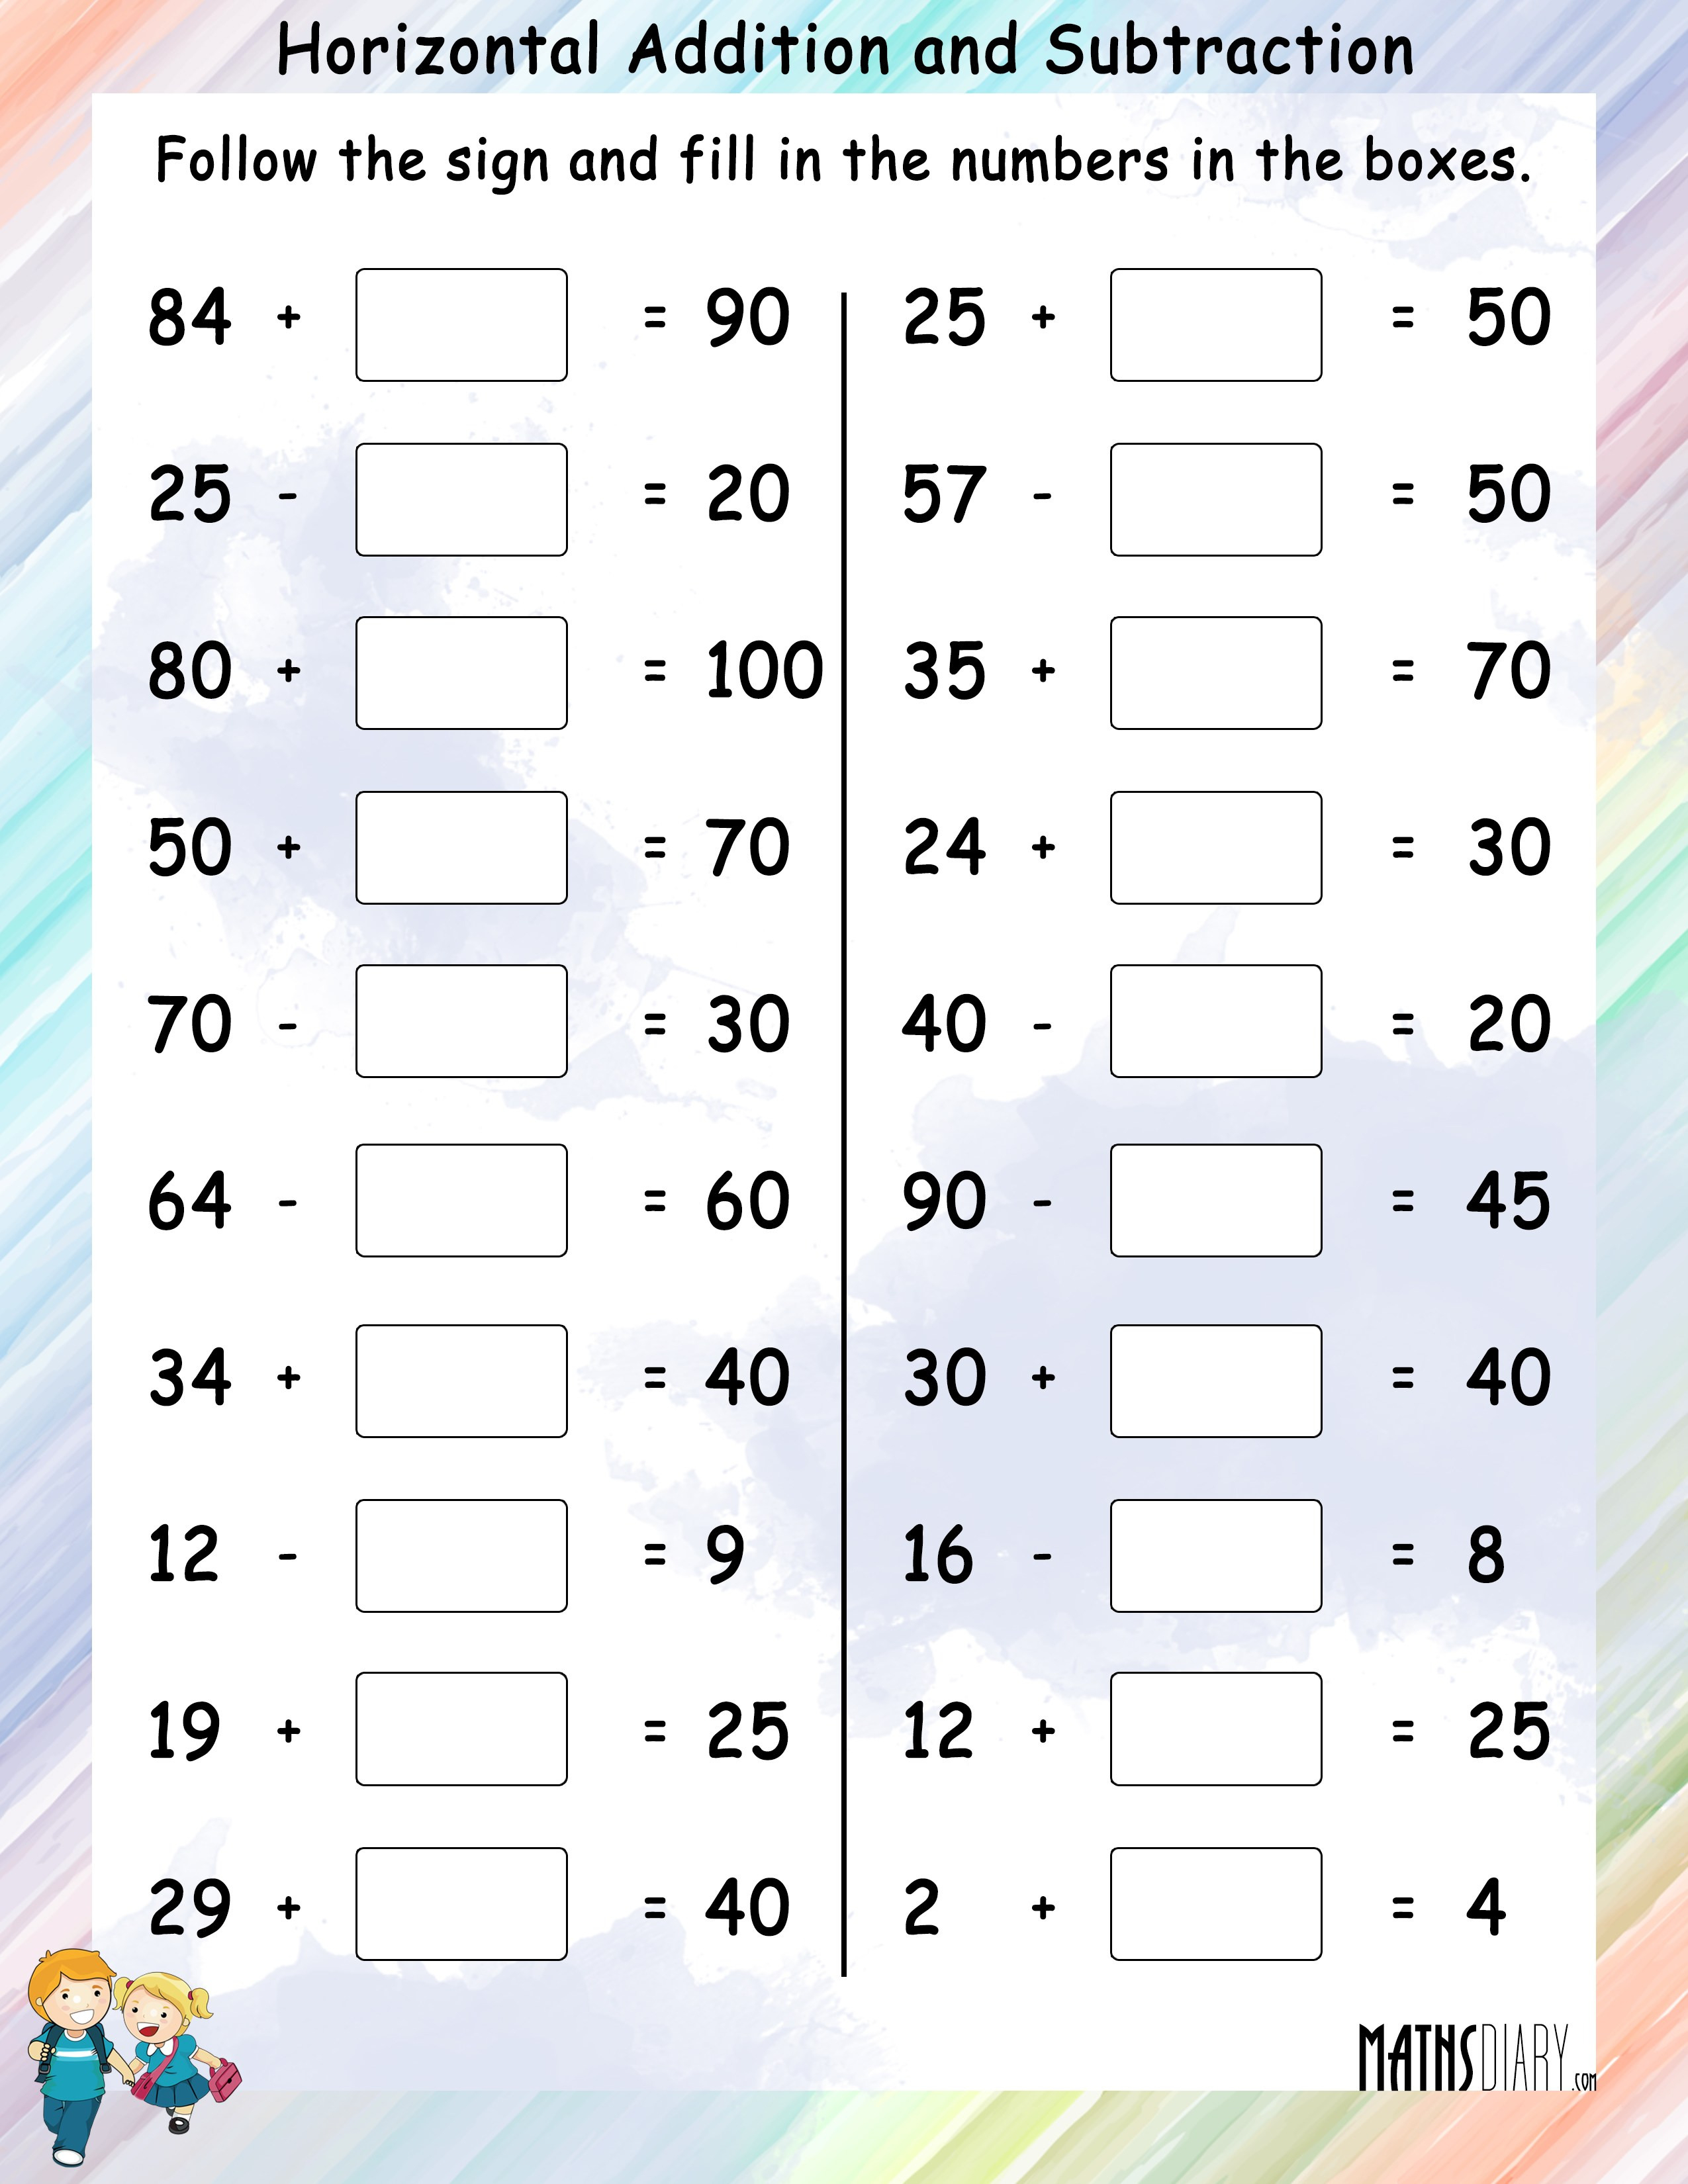 Horizontal Addition And Subtraction  Mathsdiary